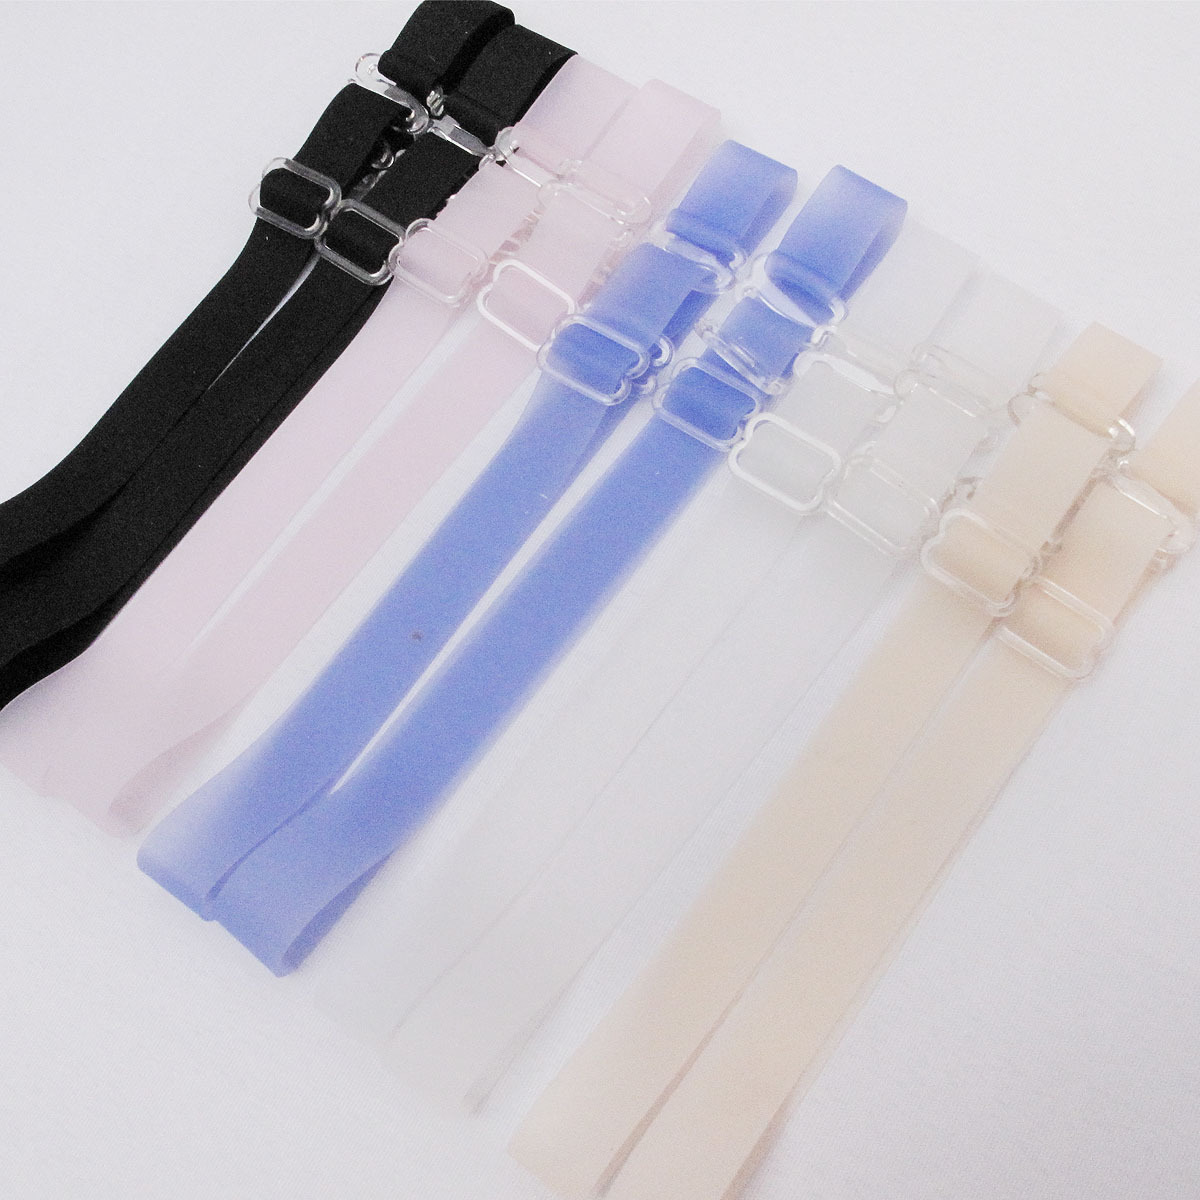 Free Shipping Realwill summer cool simple comfortable natural invisible silica gel shoulder strap